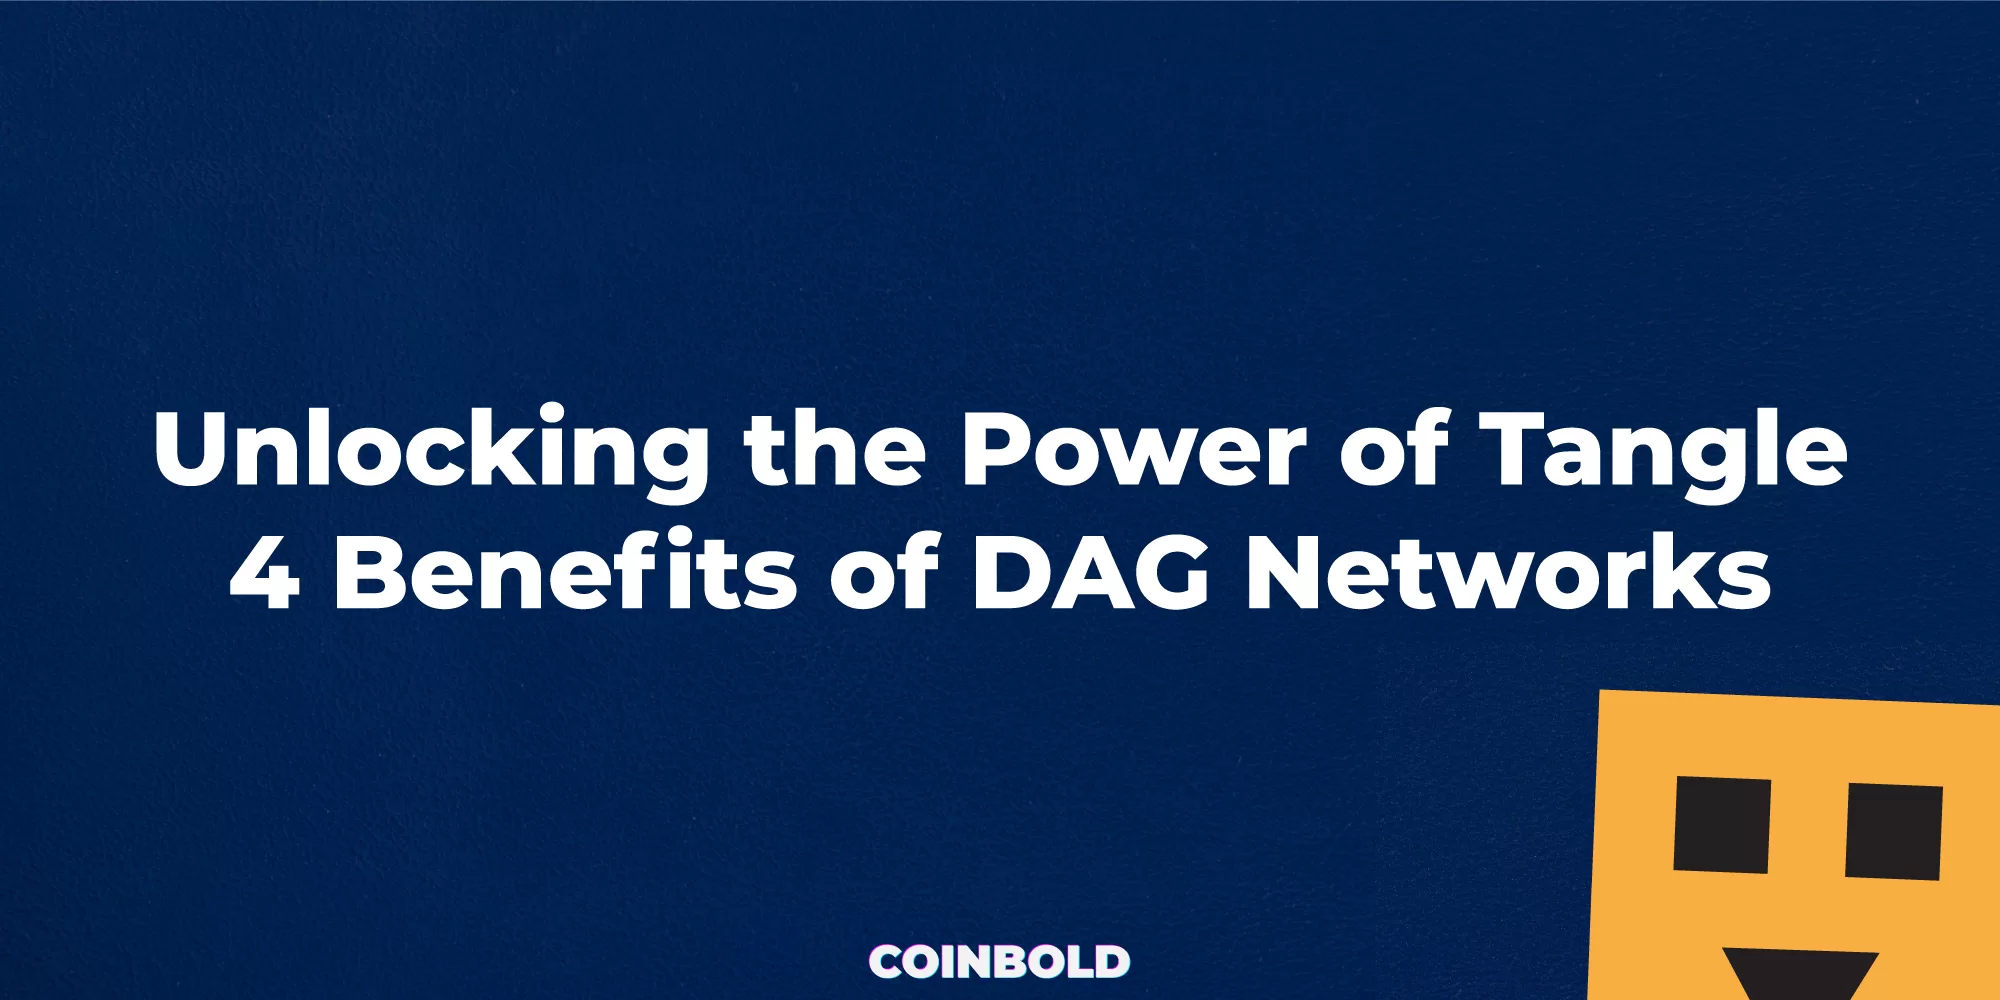 Unlocking the Power of Tangle 4 Benefits of DAG Networks